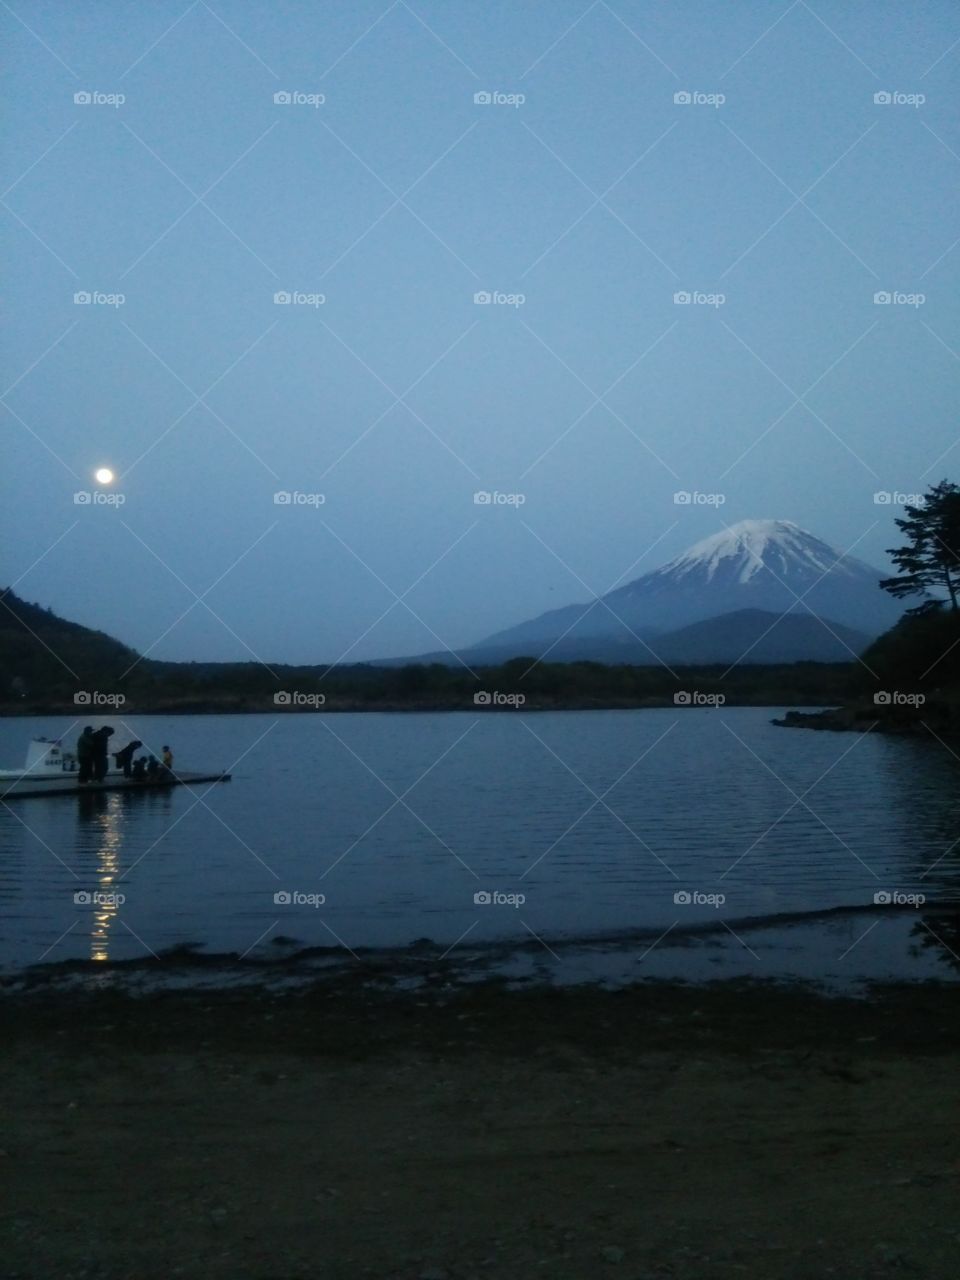 Mt. fuji with the moon